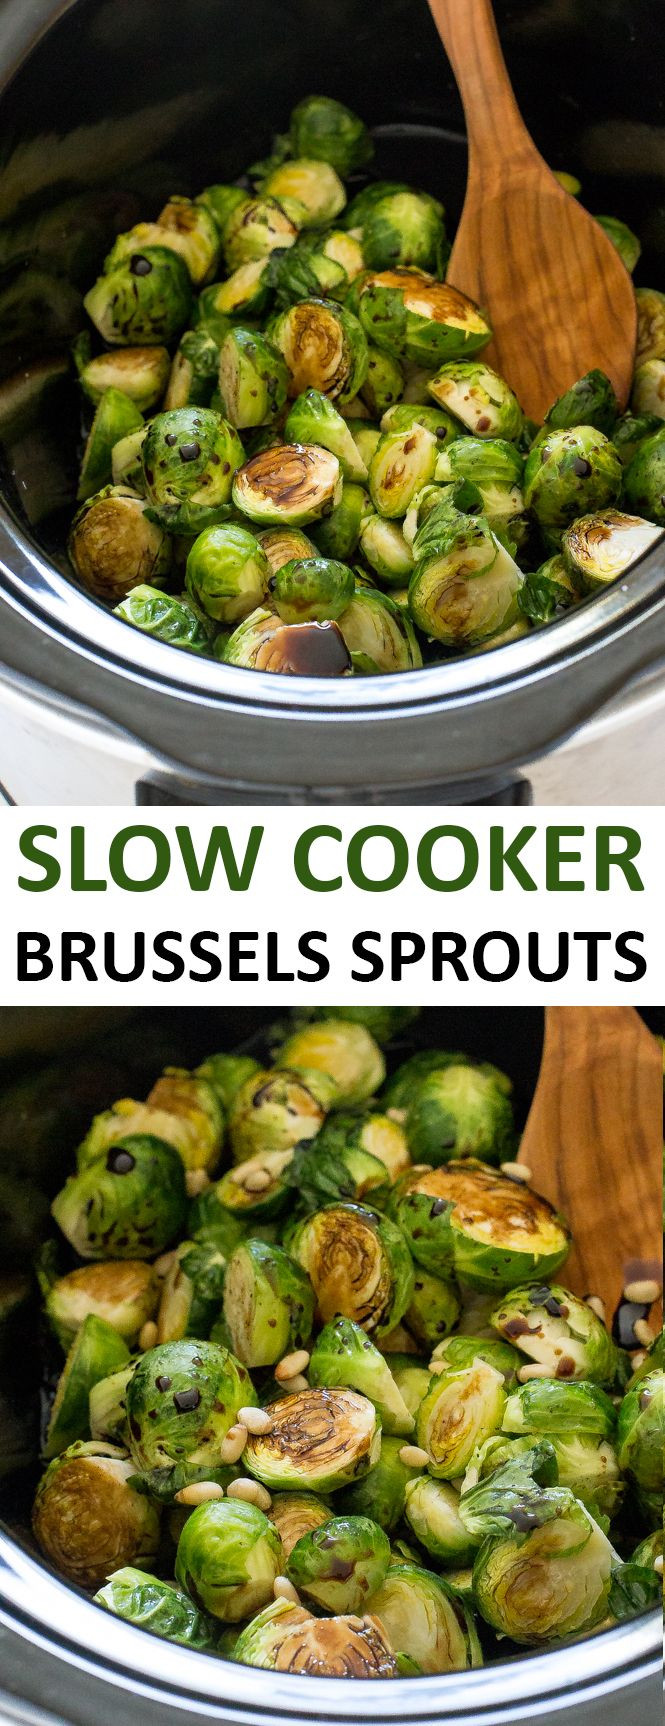 Slow Cooker Thanksgiving Side Dishes
 Slow Cooker Balsamic Brussels Sprouts Recipe